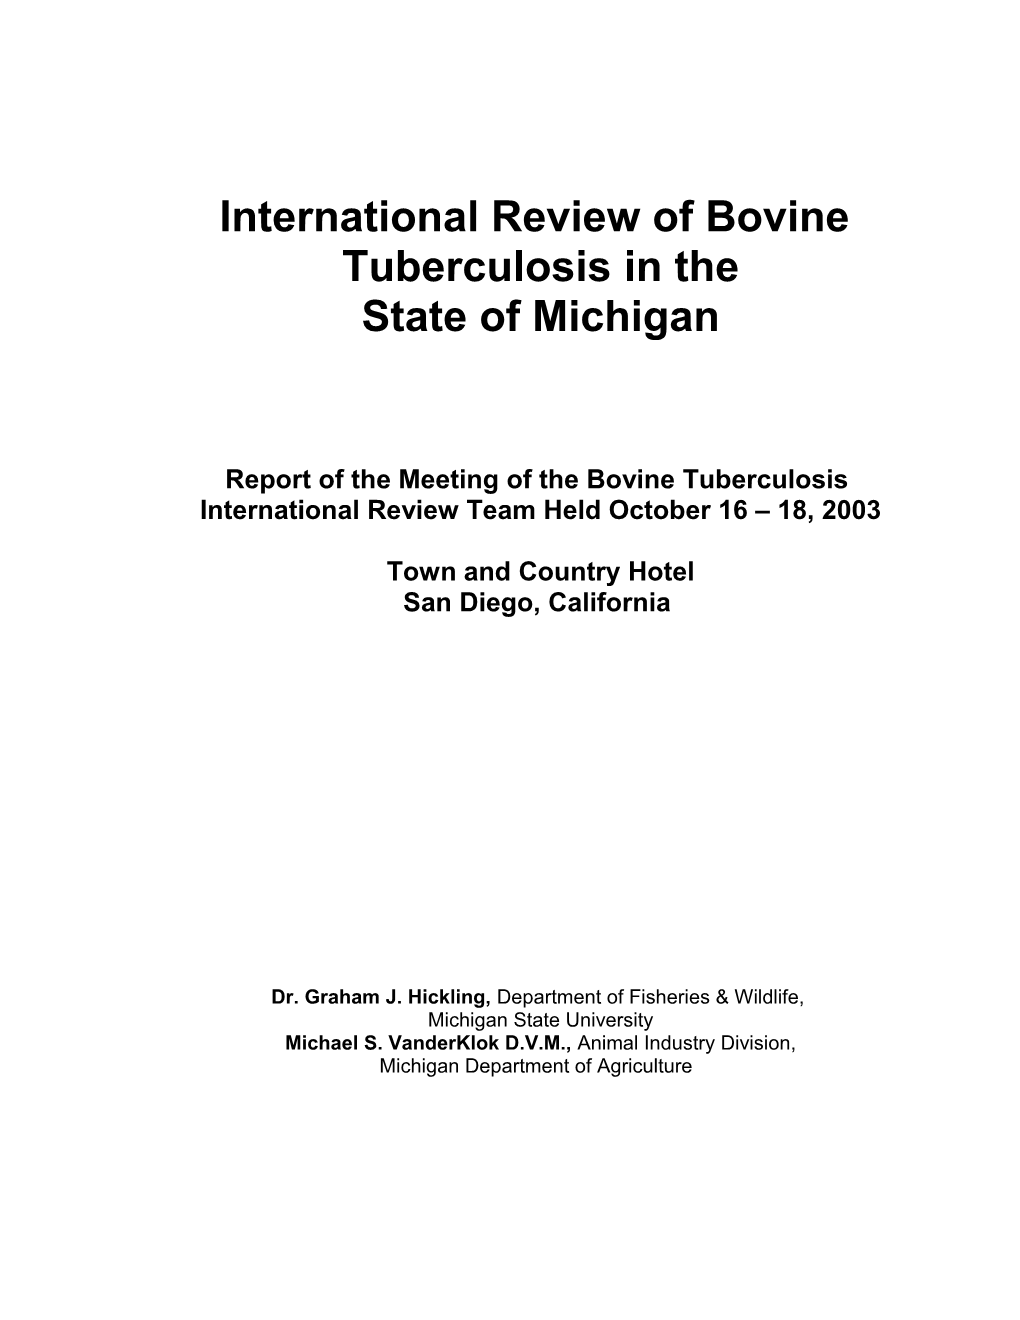 A Review of the Bovine Tuberculosis